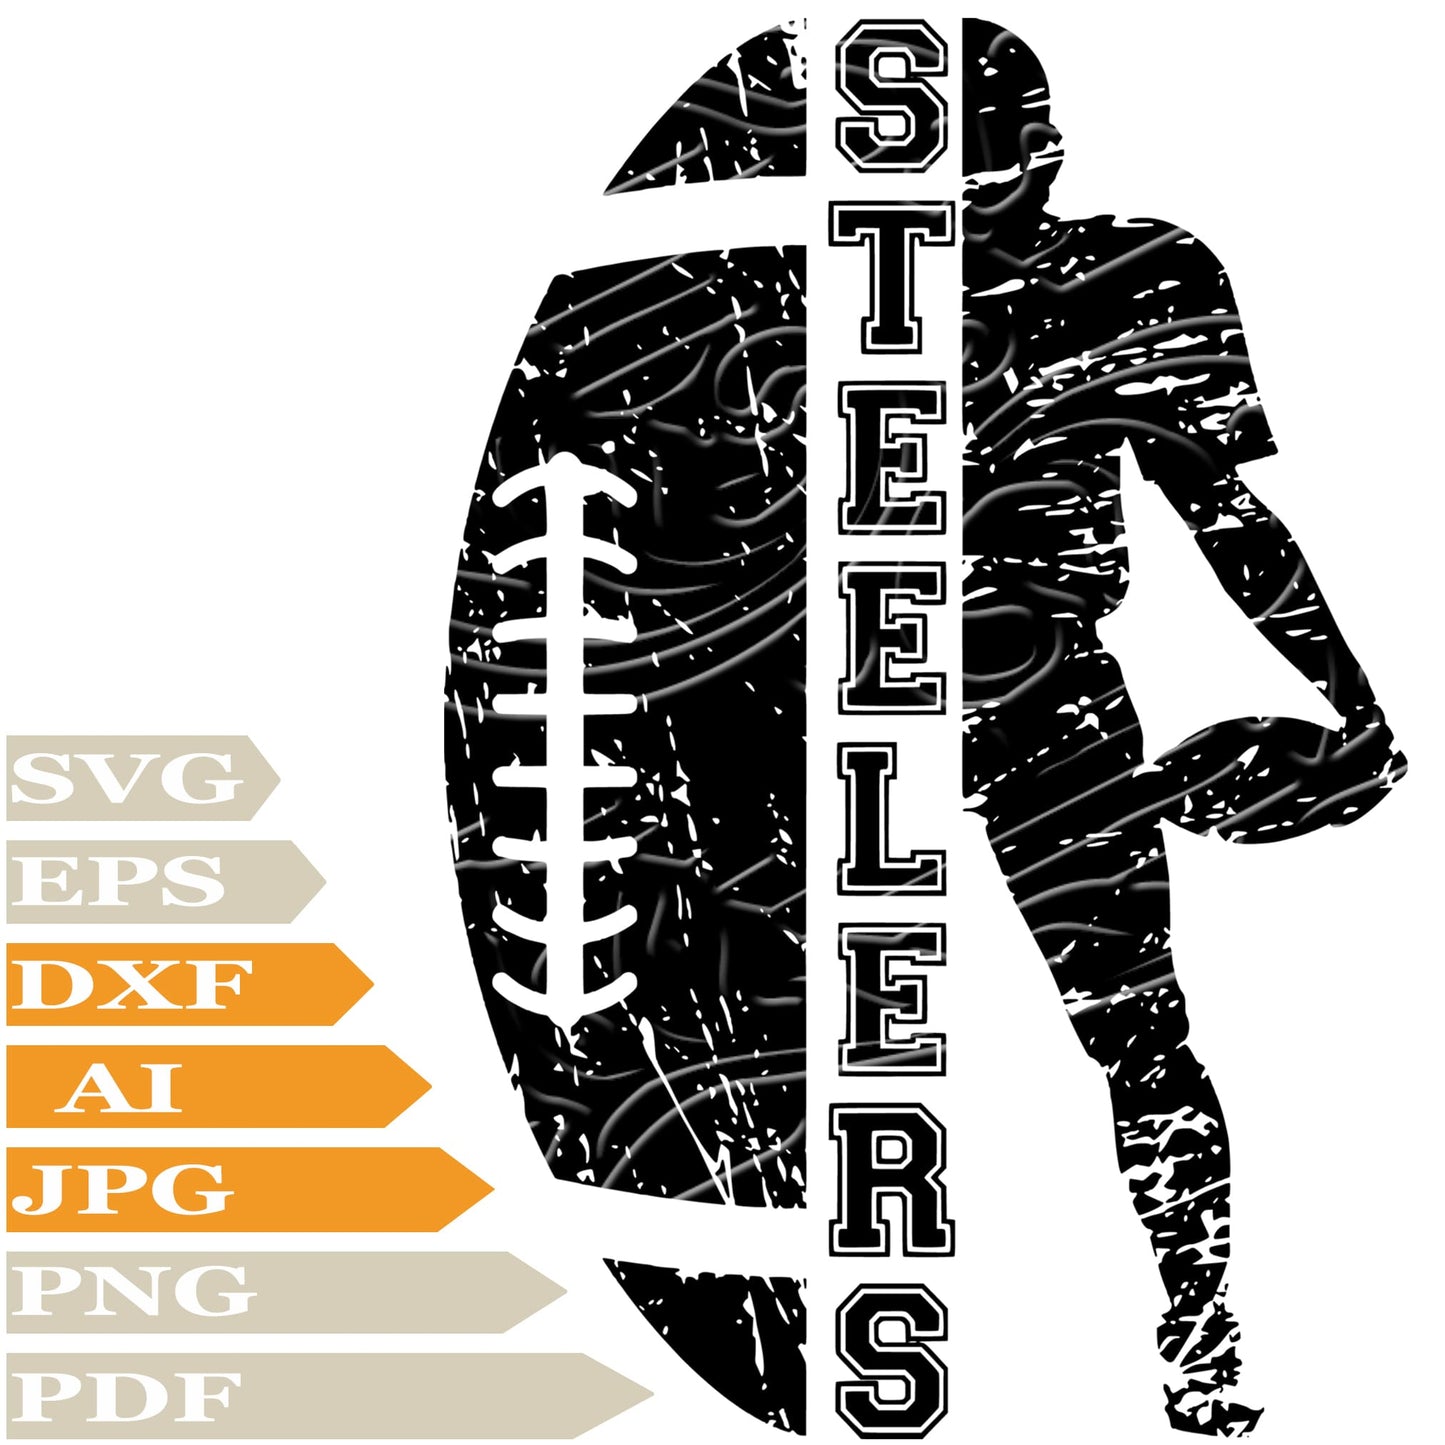 Steelers Football, Pittsburgh Steelers Logo Svg File, Image Cut, Png, For Tattoo, Silhouette, Digital Vector Download, Cut File, Clipart, For Cricut